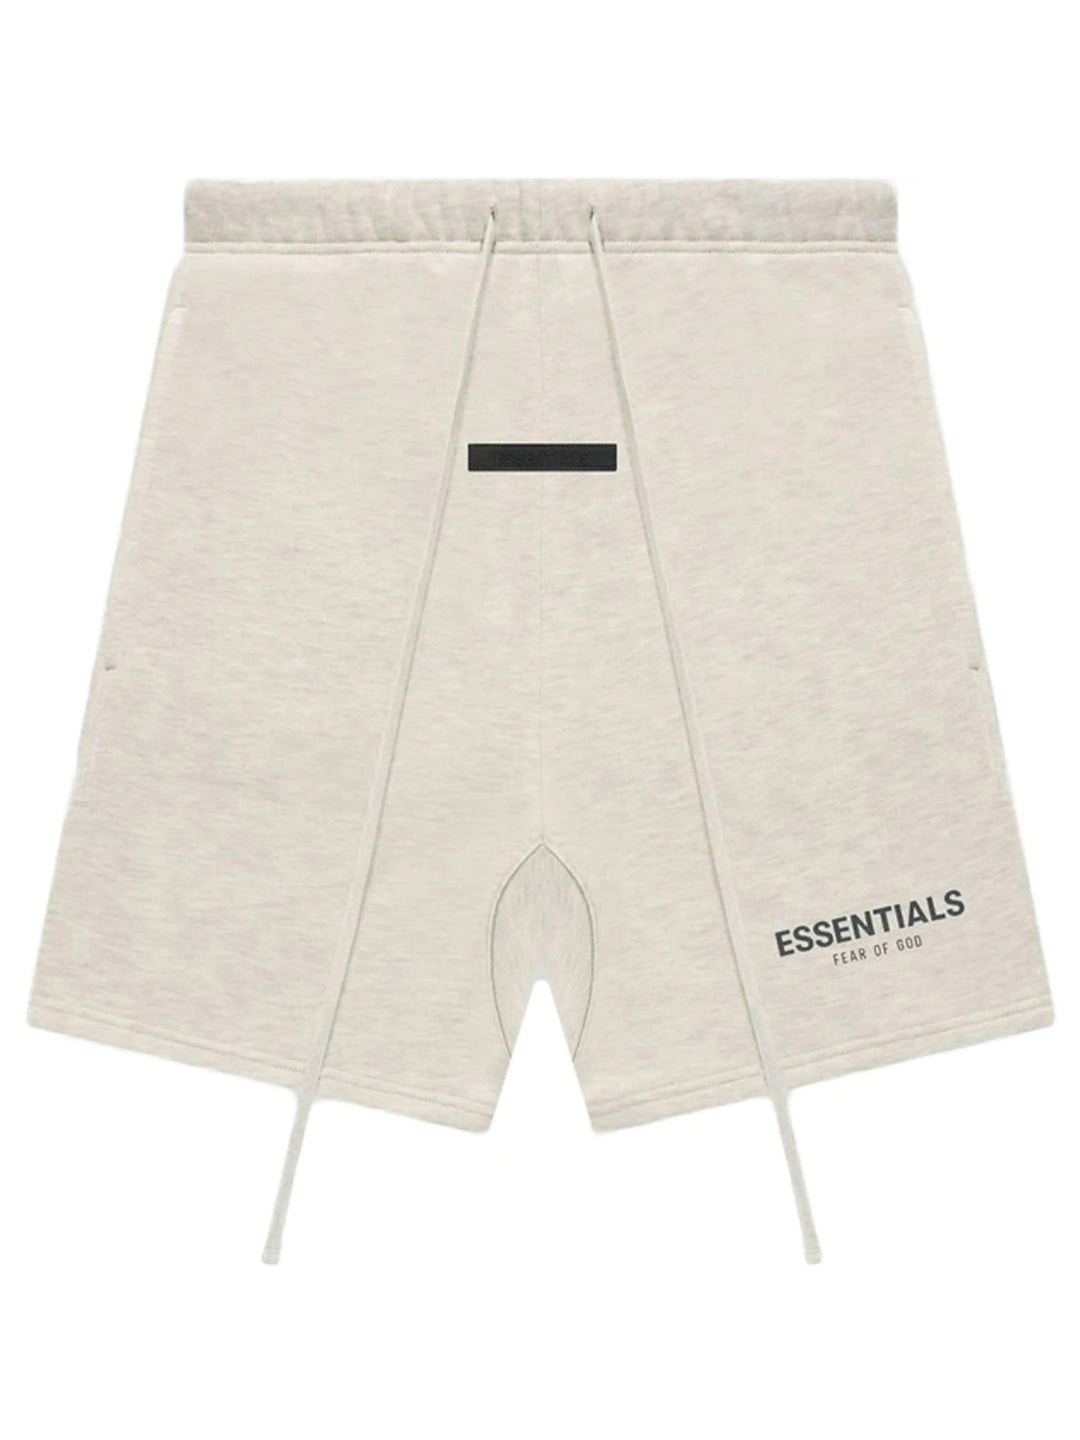 Fear Of God Essentials Core Collection Sweatshorts Light Heather Oatmeal Prior